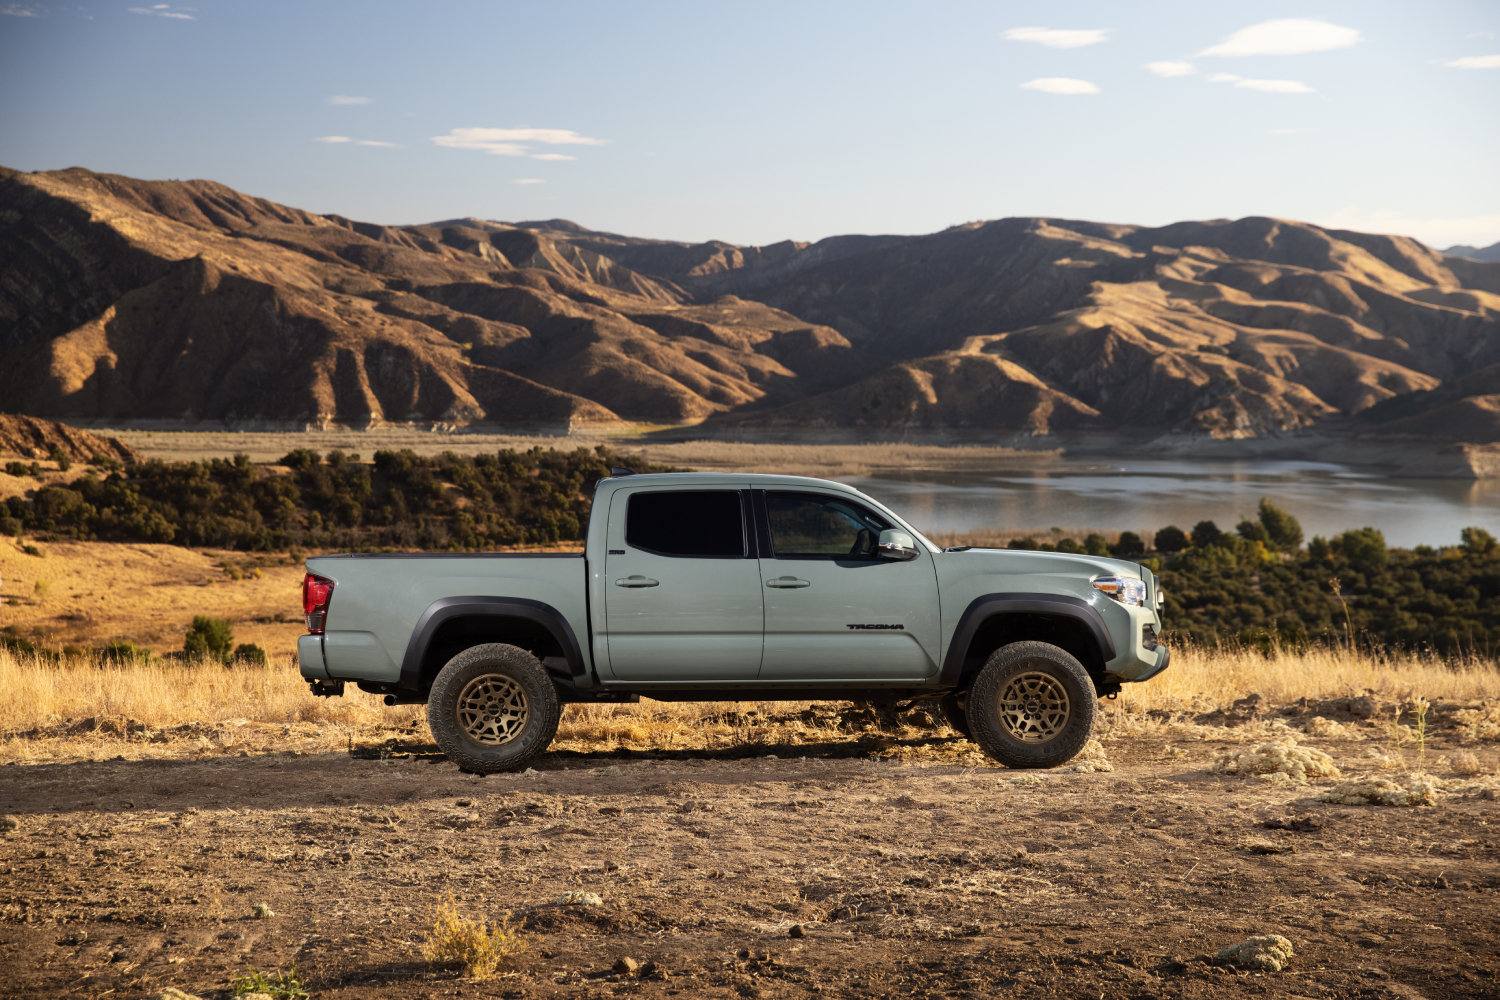 2022 Toyota Tacoma safety rating only marginal on IIHS test